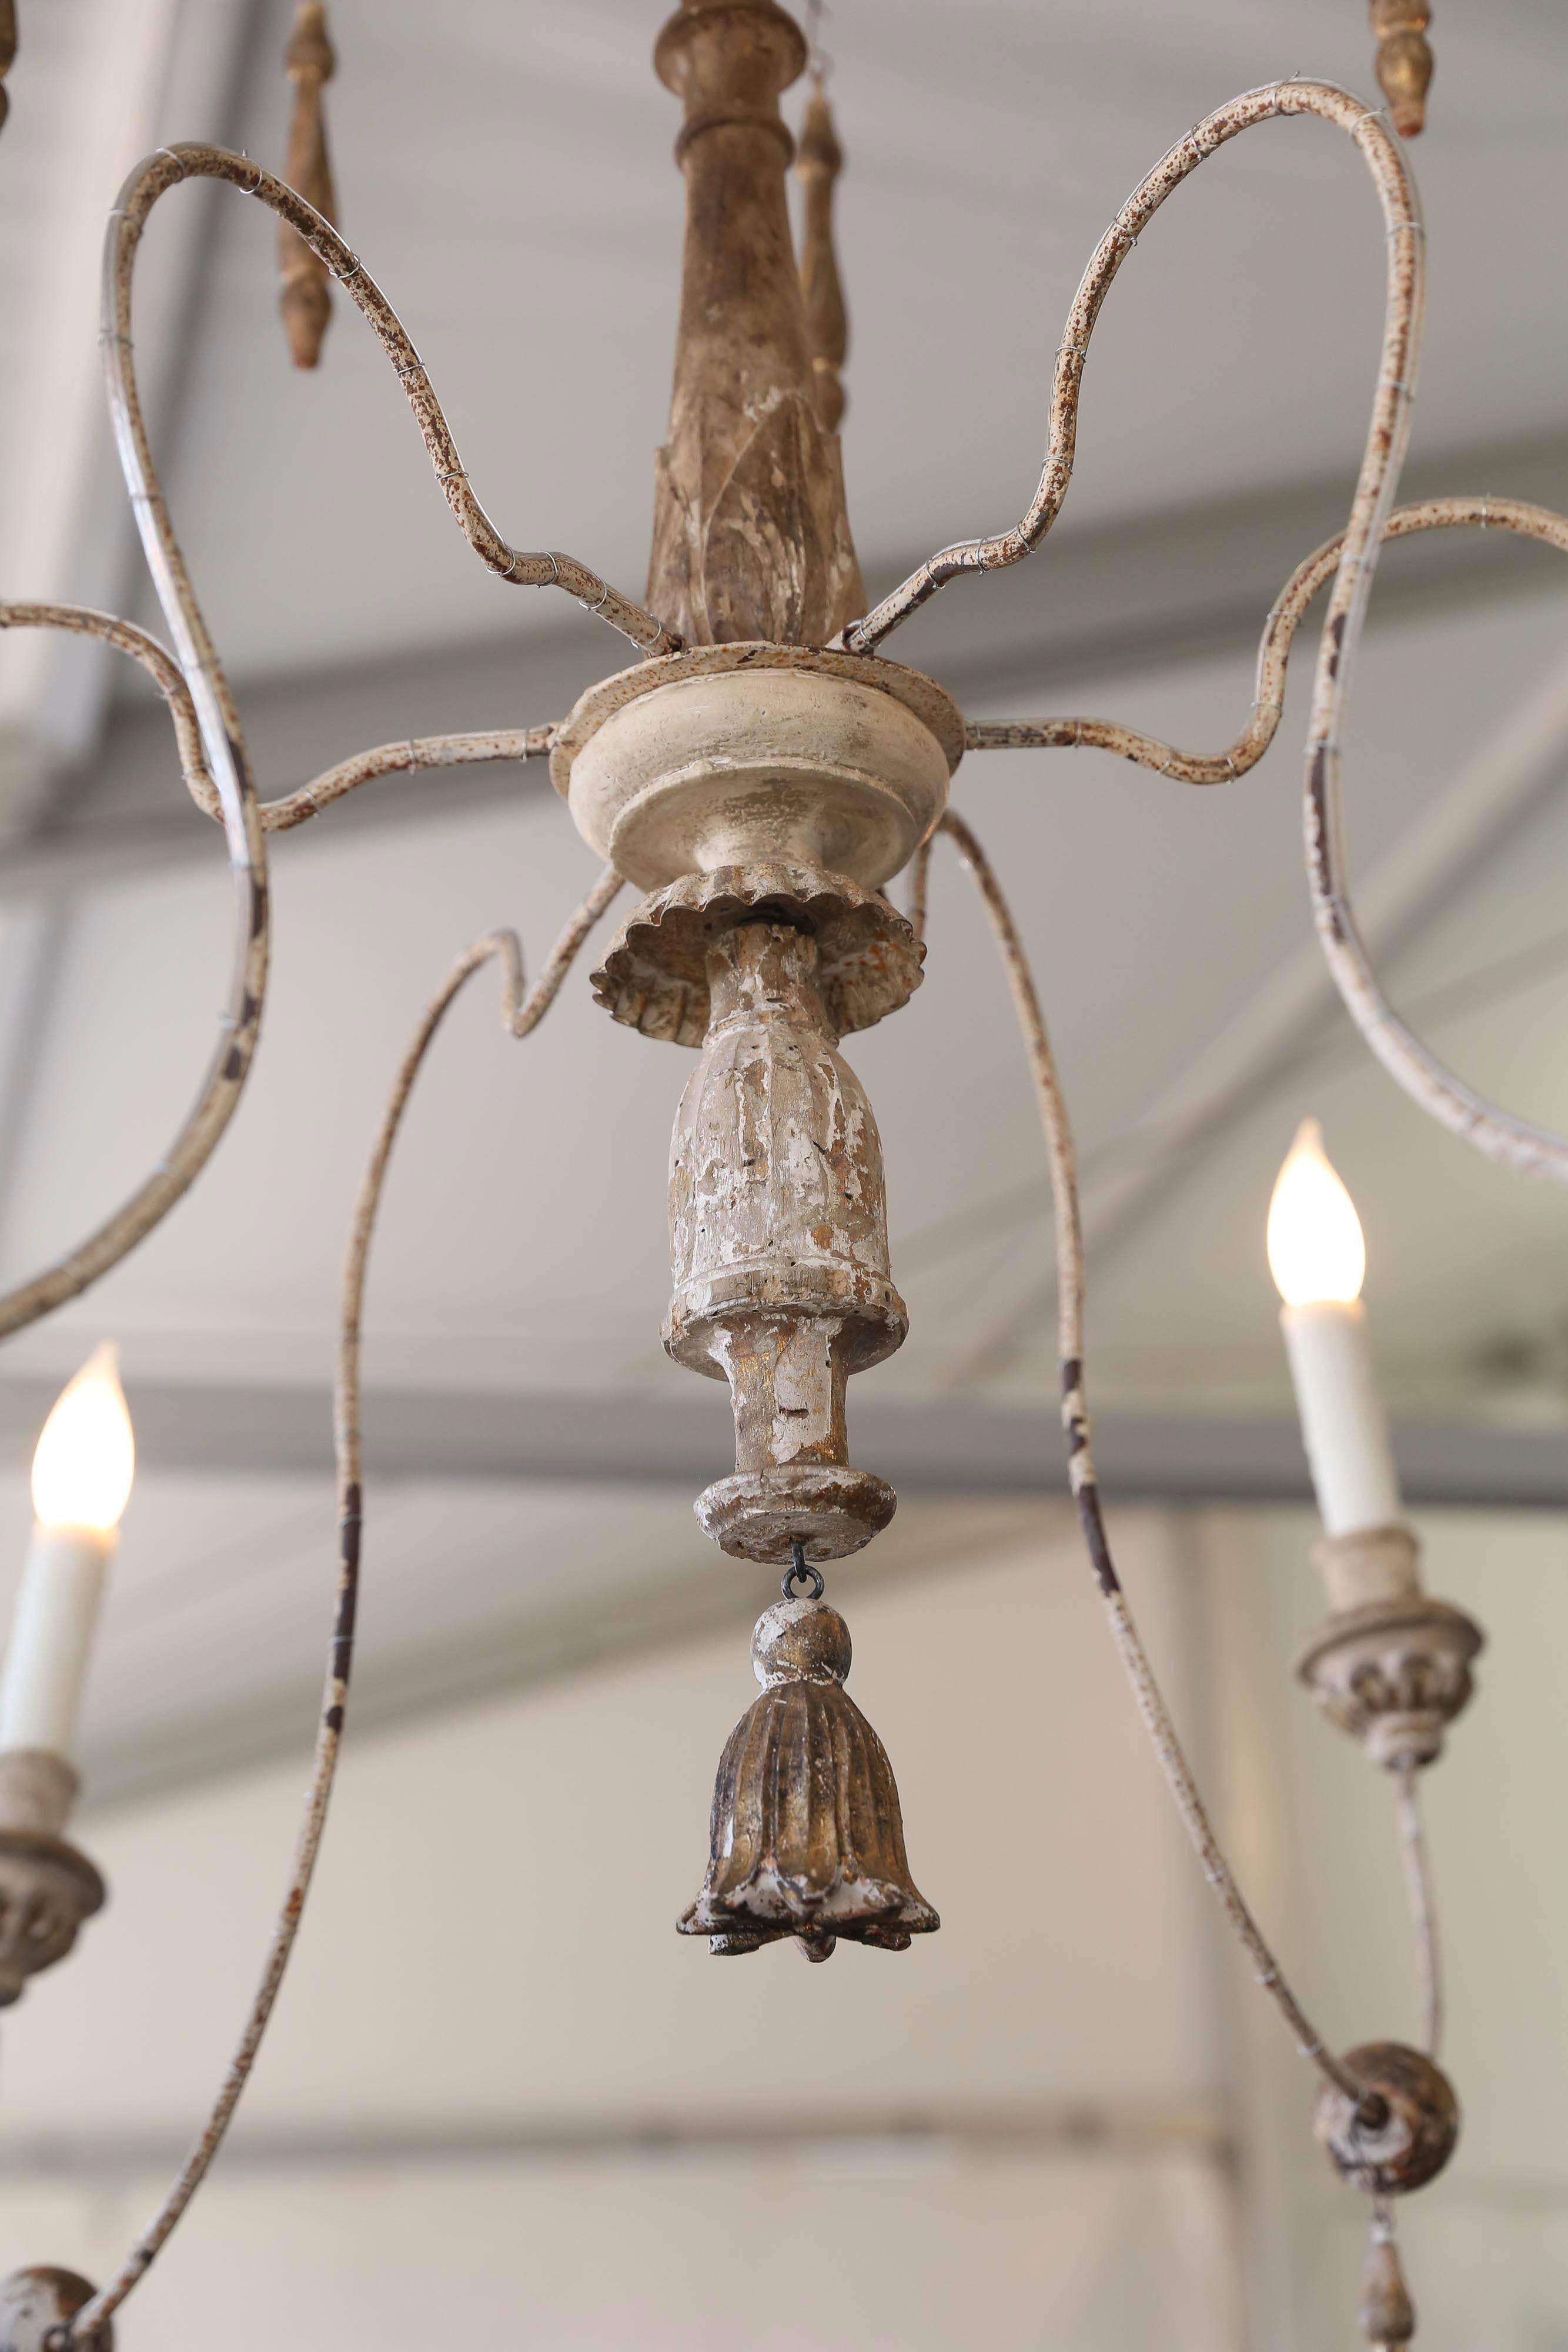 Handsome Italian spider chandelier with six arms has been newly wired for the U.S. This fixture has been made with 18th century parts.